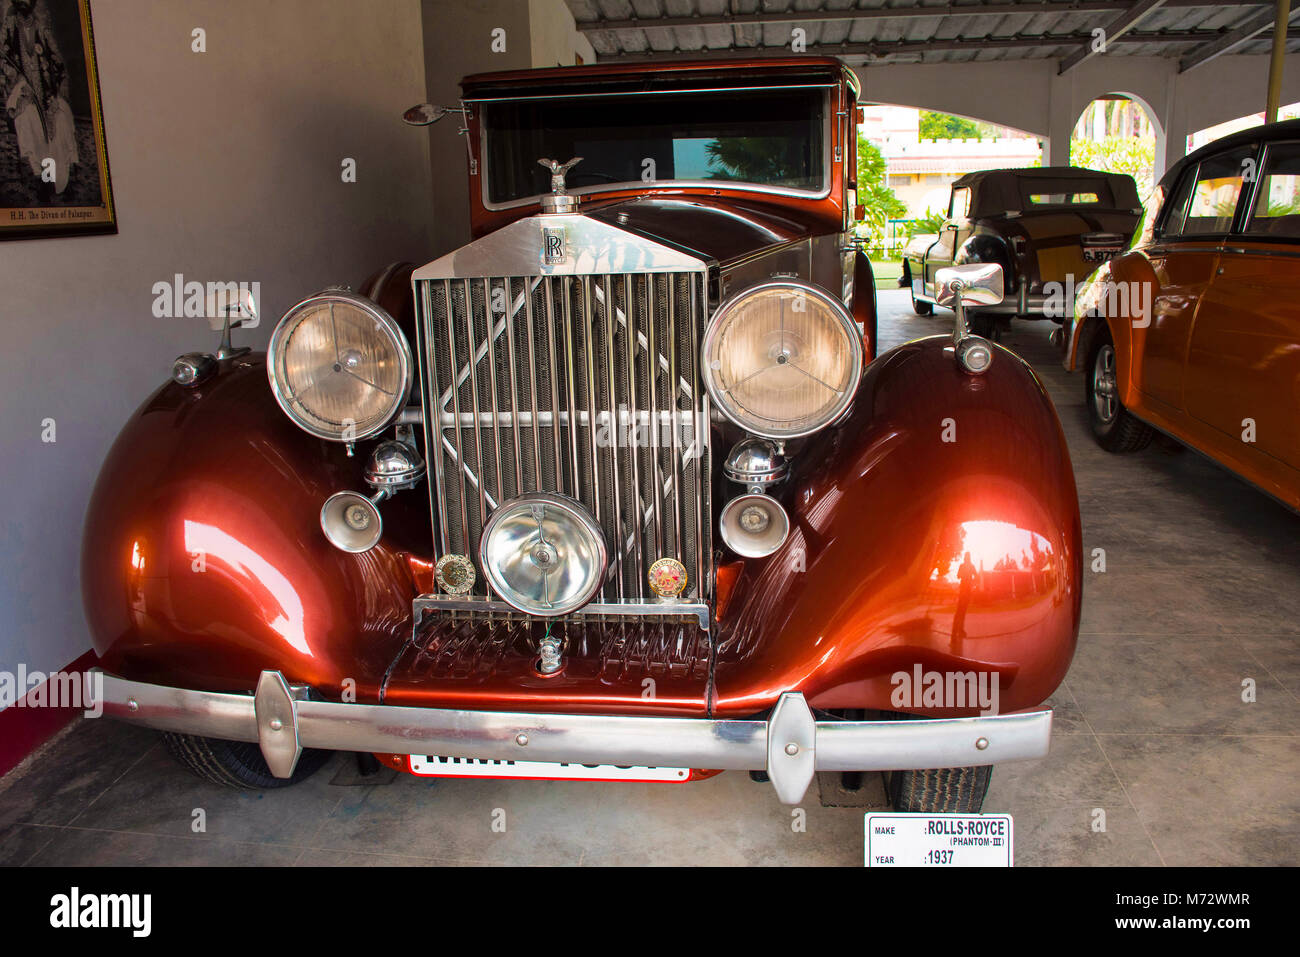 Rolls Royce, brown colored vintage car in Auto World Vintage Car Museum of Ahmedabad Gujarat Stock Photo